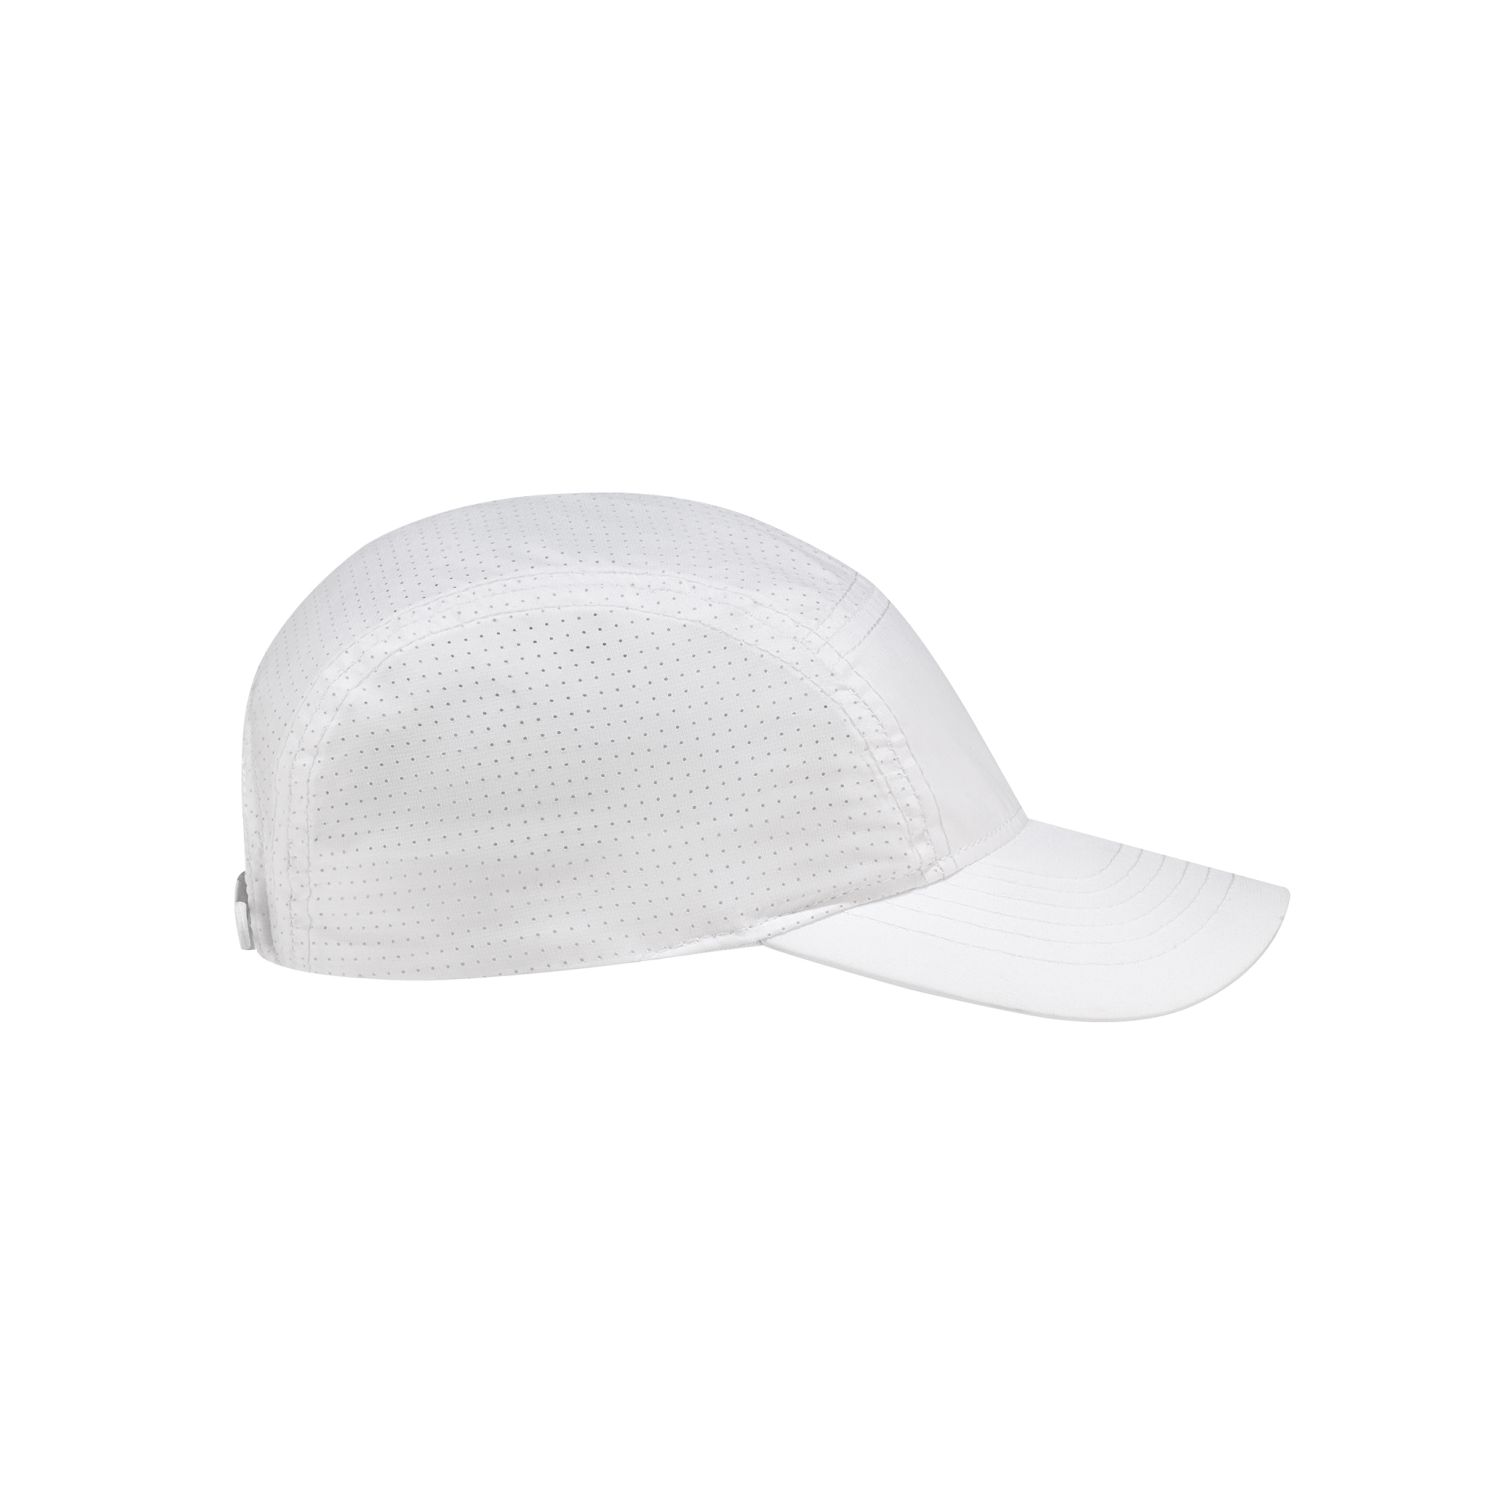 AJM Polyester Rip Stop / Polyester Rip Stop Mesh 5 Panel Runner Style Hat #1B940M White Side